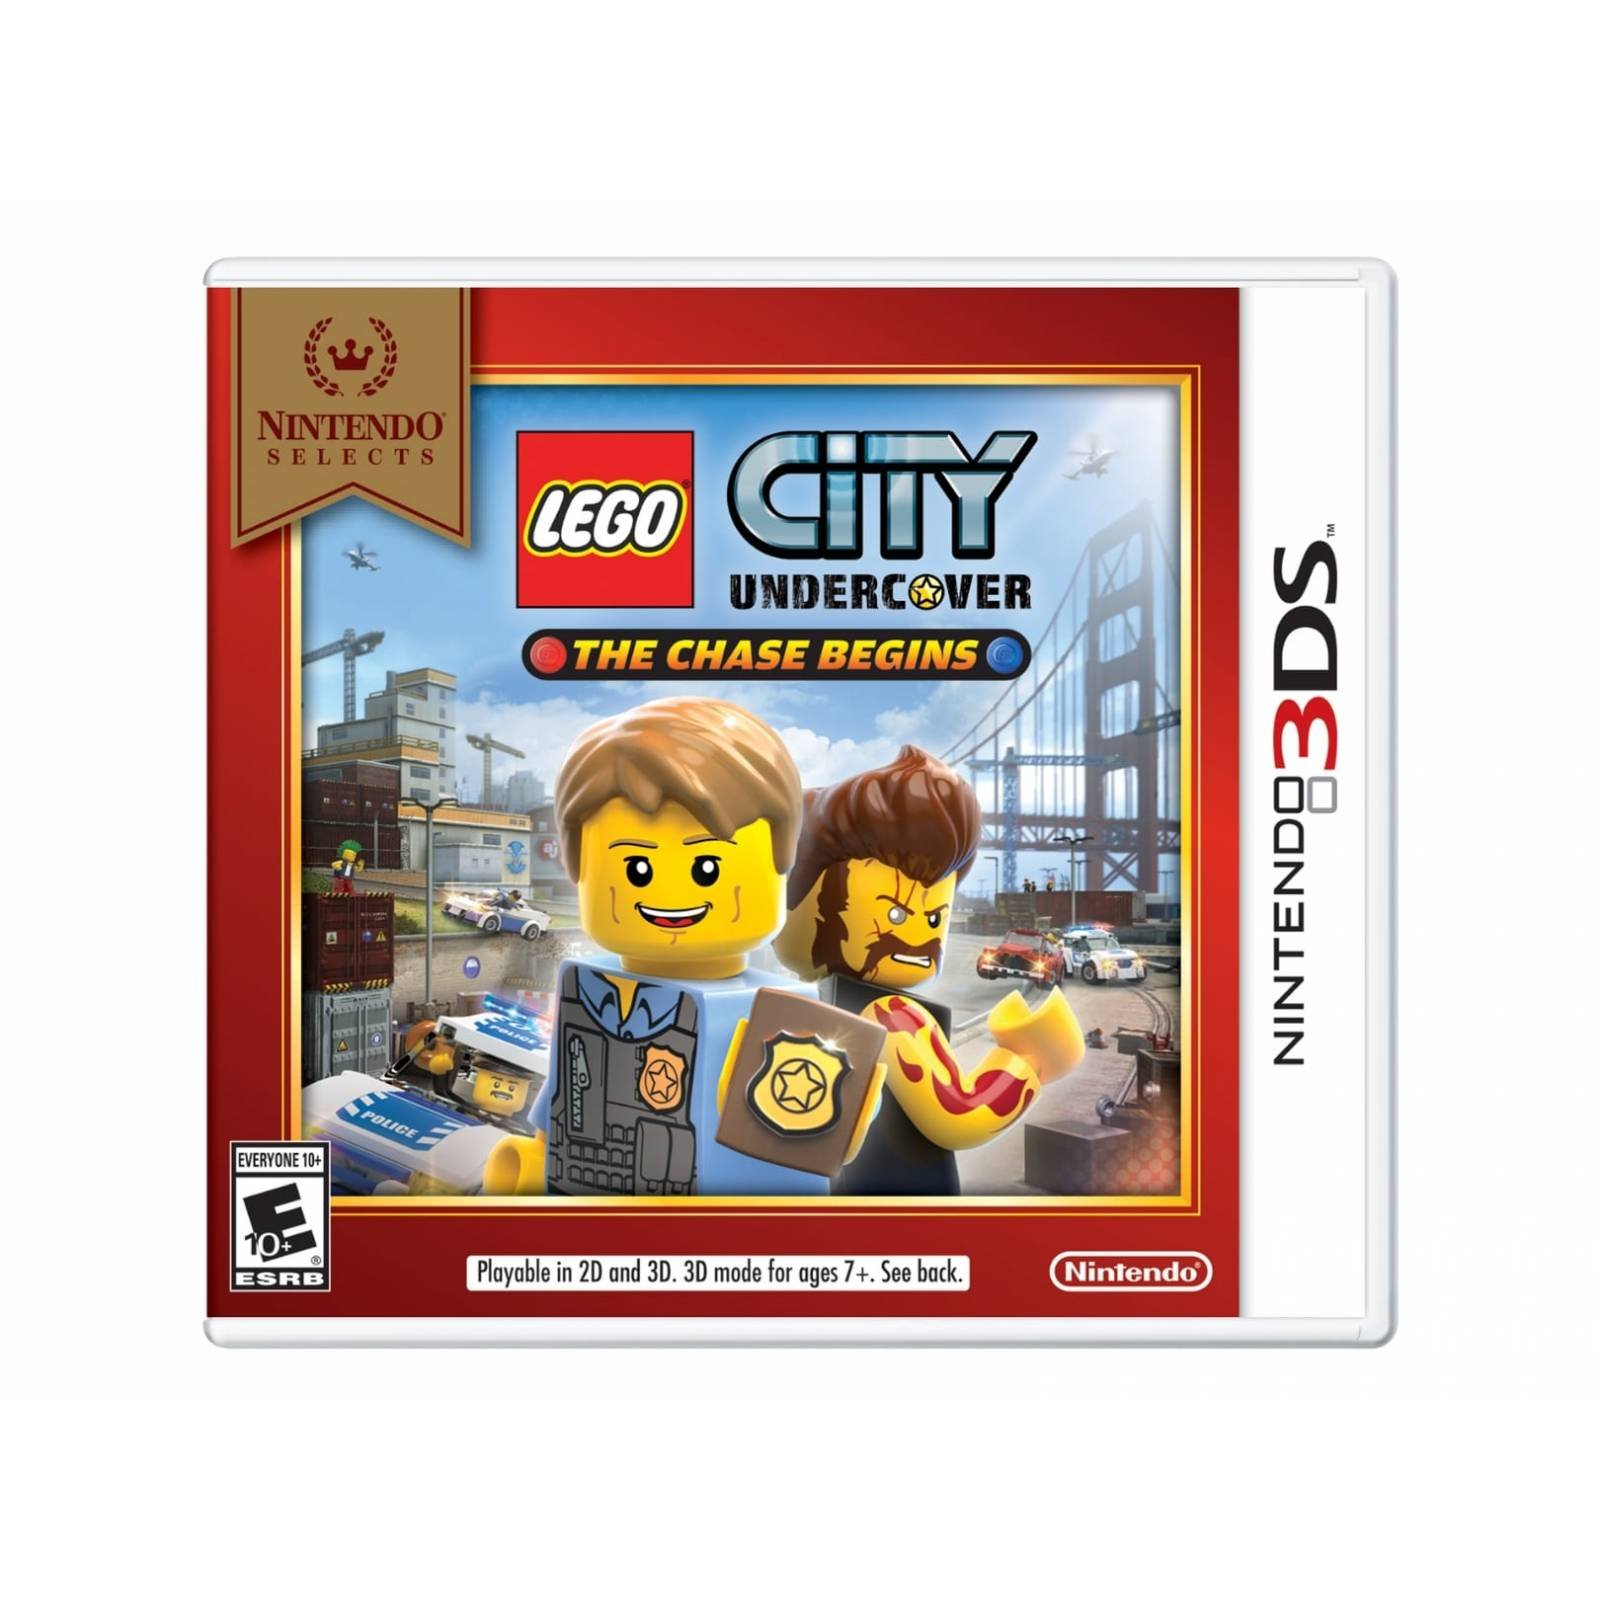 LEGO CITY UNDERCOVER 3DS